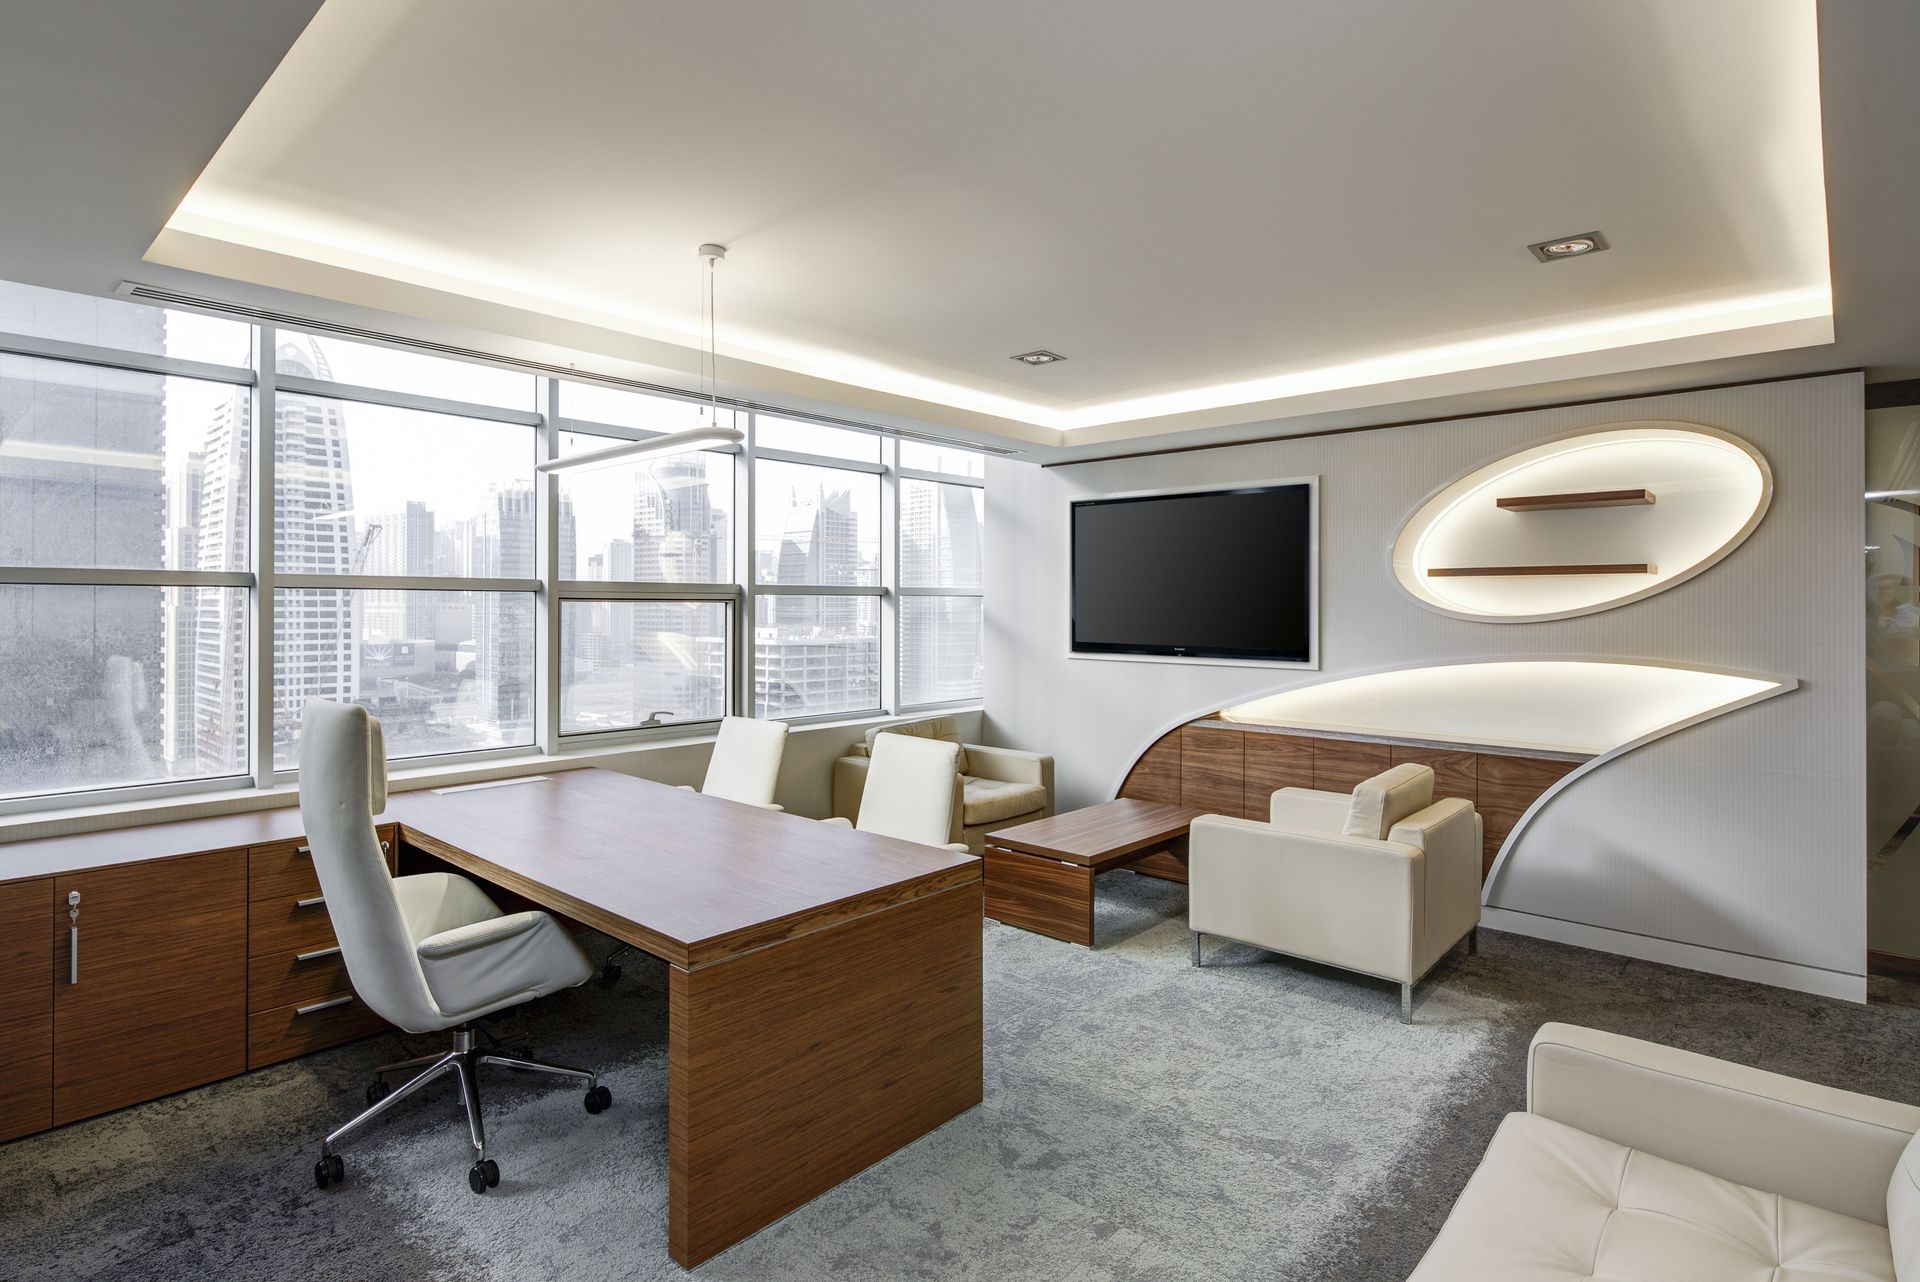 Modern office space with white interior and lights